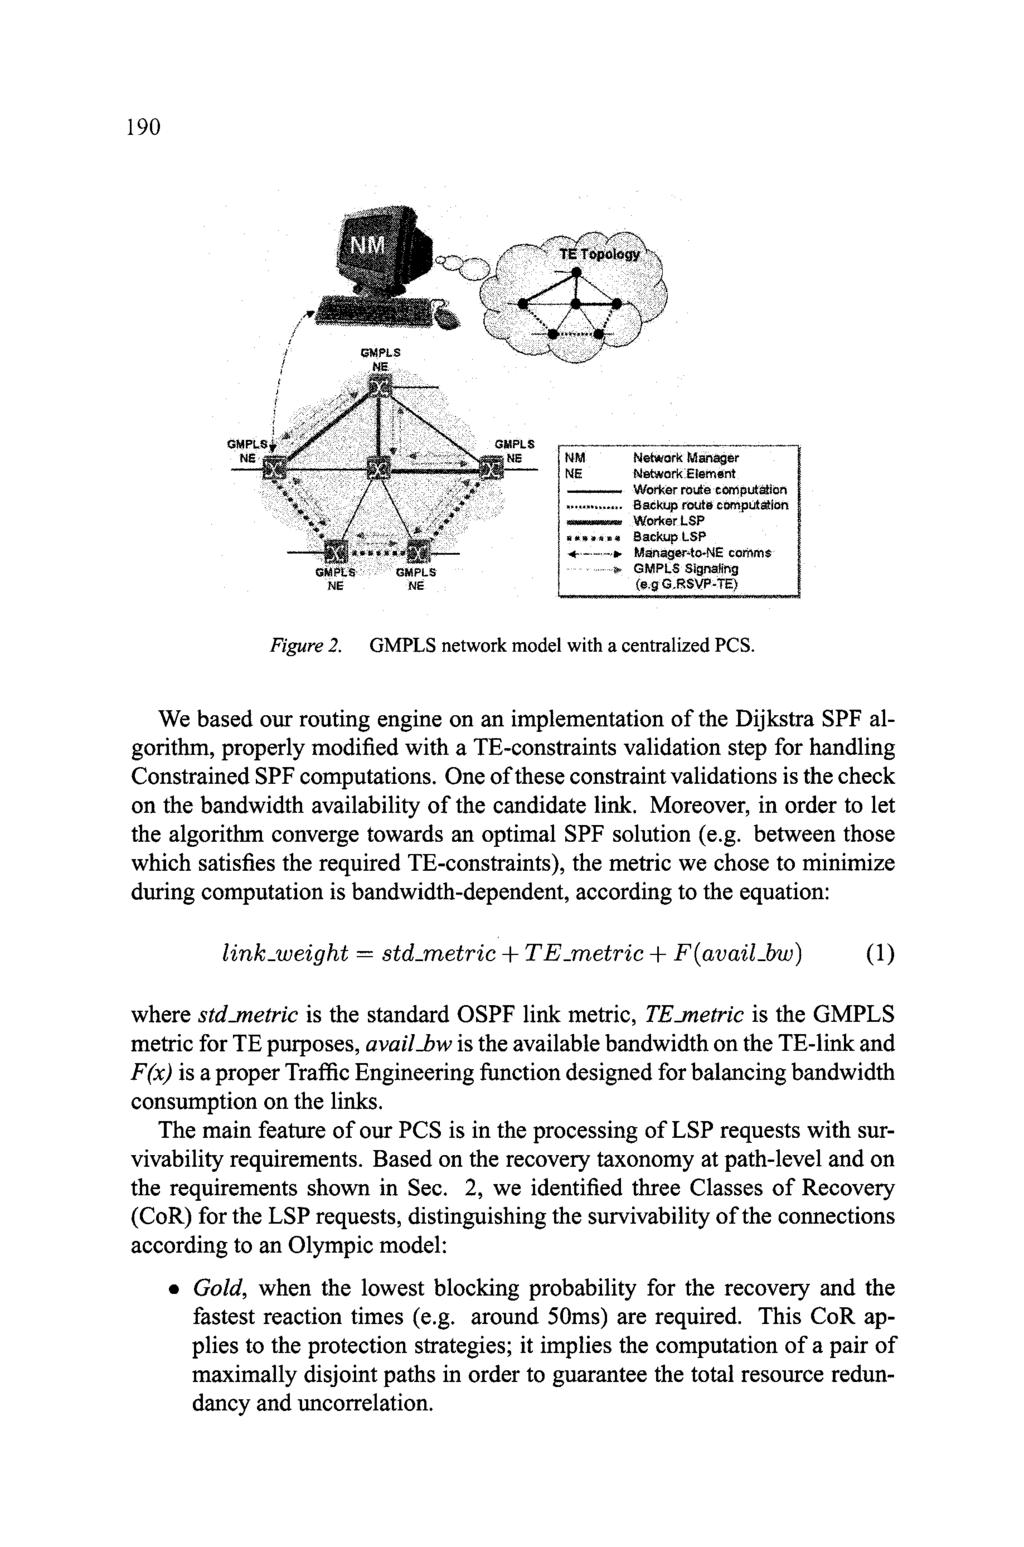 190 NM NE Network Manager Network Etement ««««< m^ Worker LSP K«Backup LSP - Manager-to-NE comms 0" GMPLS Signaling (e.gg.rsvp-te) Figure 2. GMPLS network model with a centralized PCS.